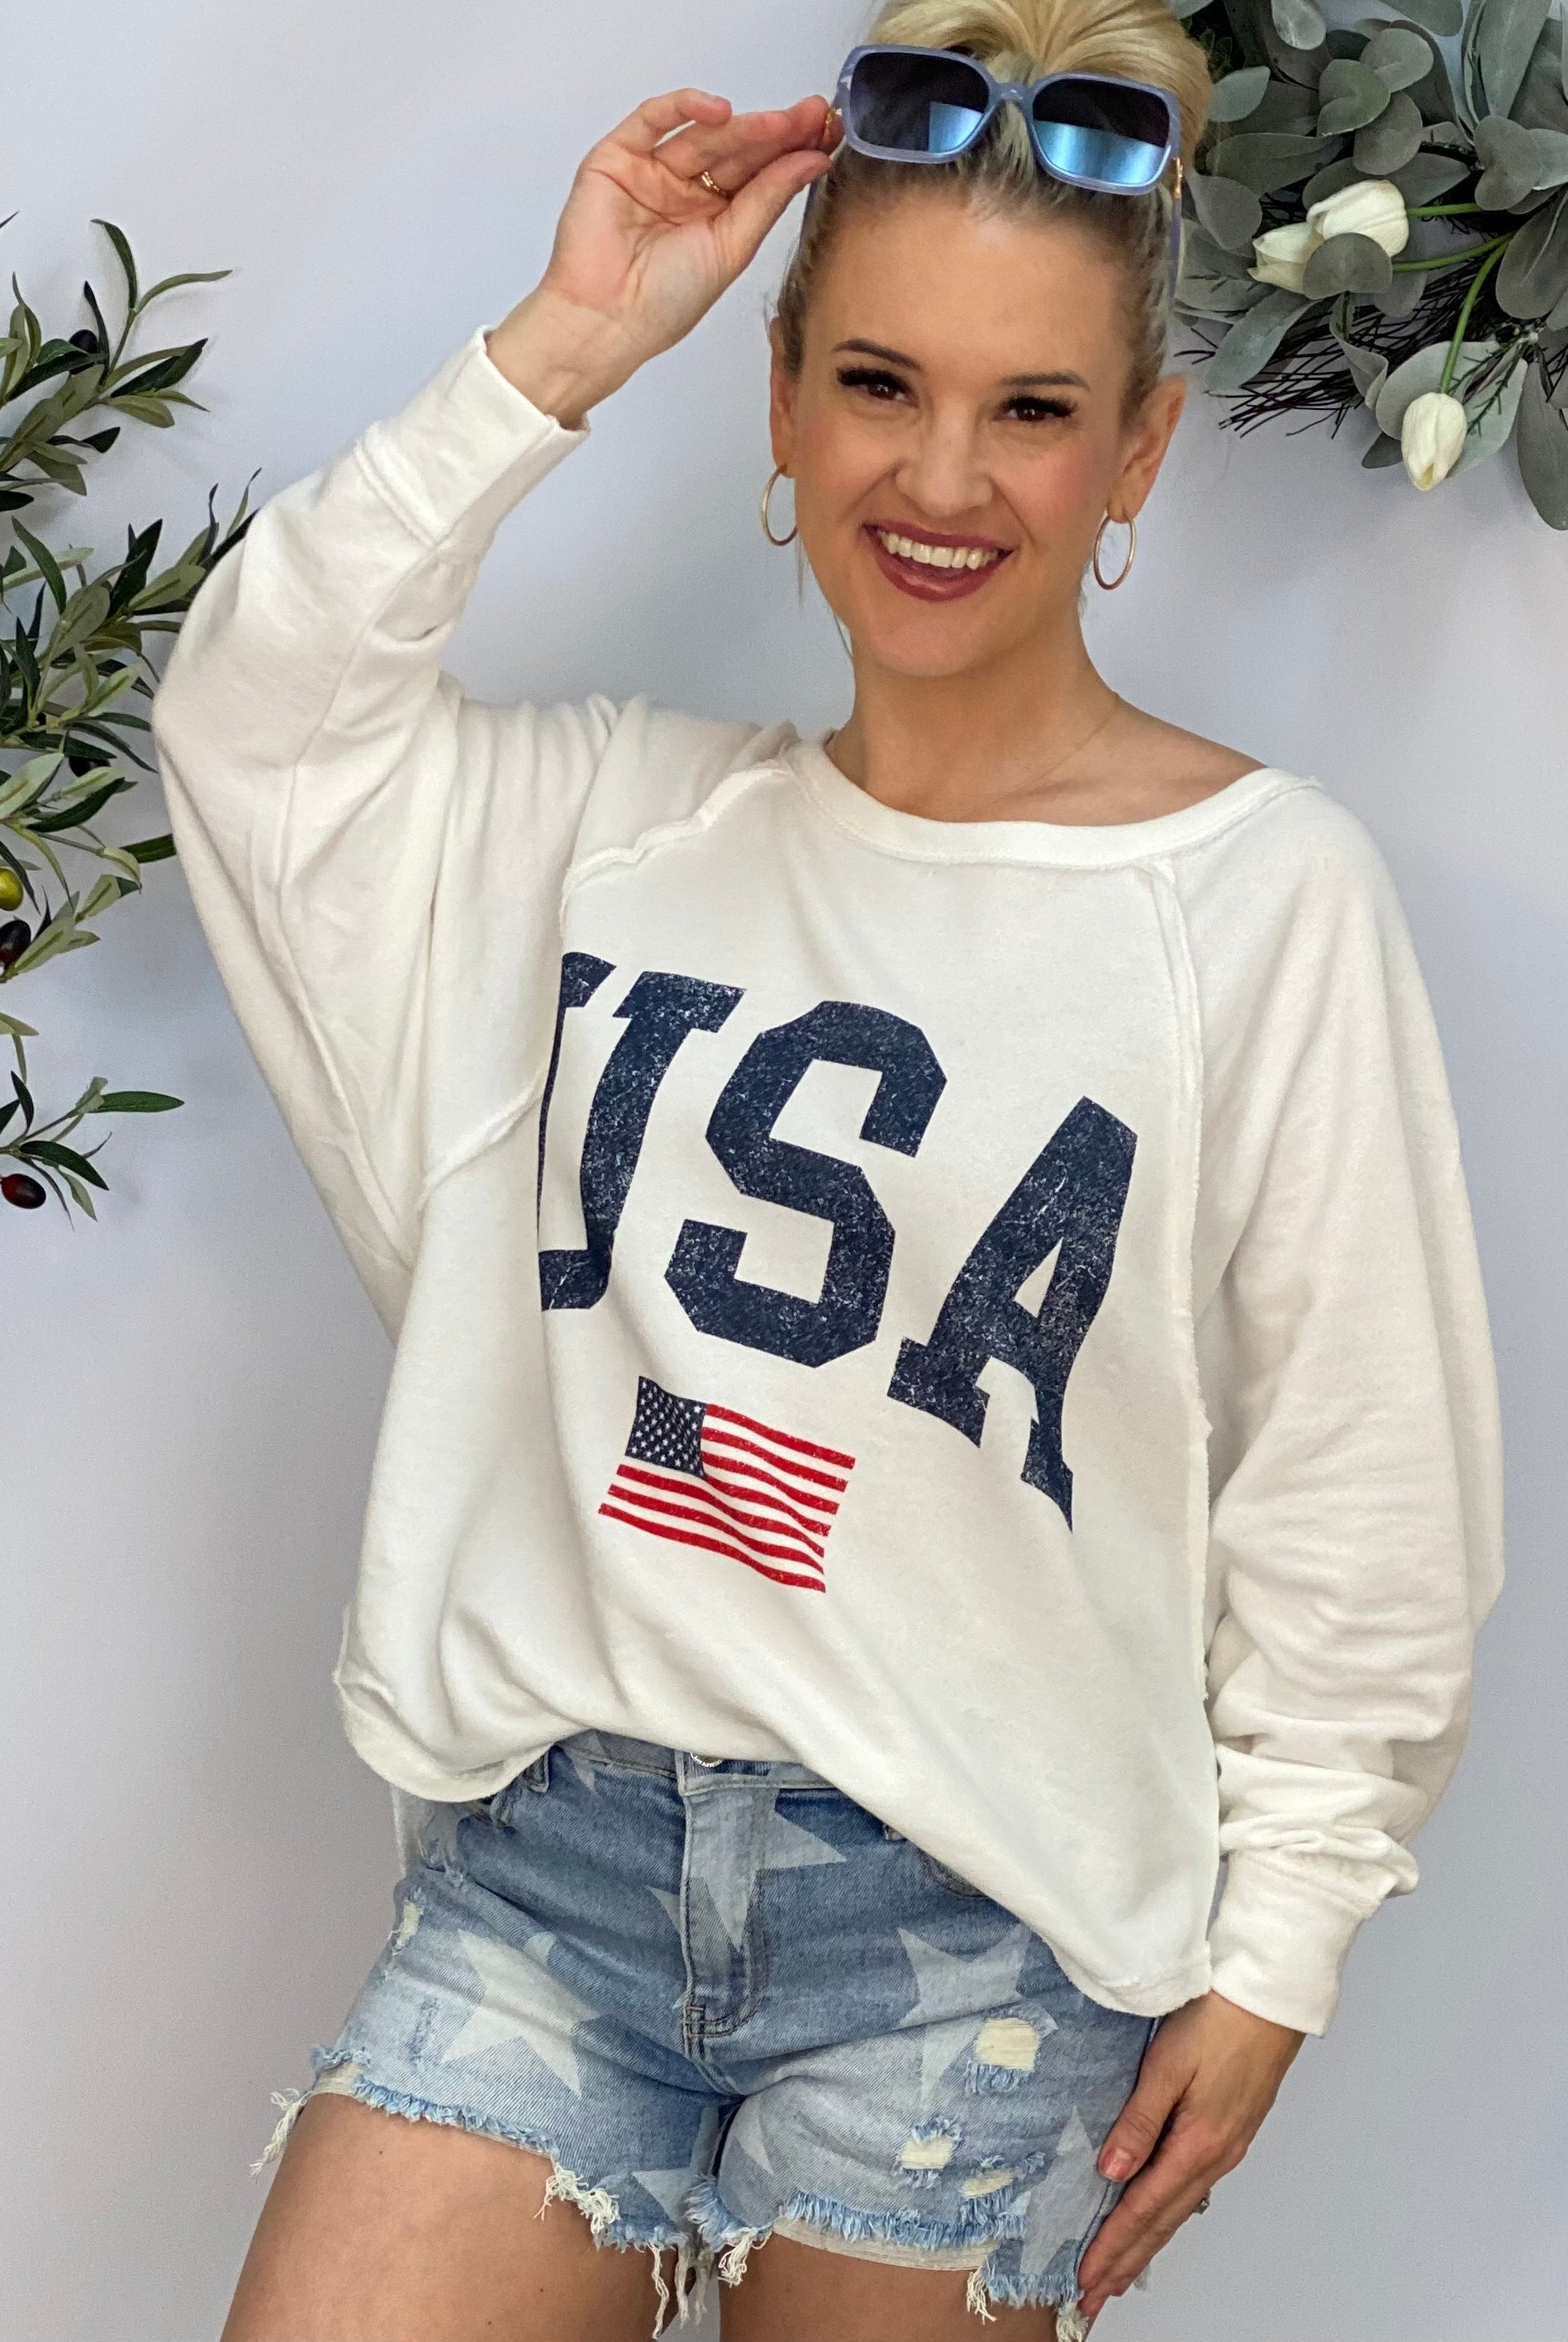 USA Pullover-pullover-The Lovely Closet-The Lovely Closet, Women's Fashion Boutique in Alexandria, KY